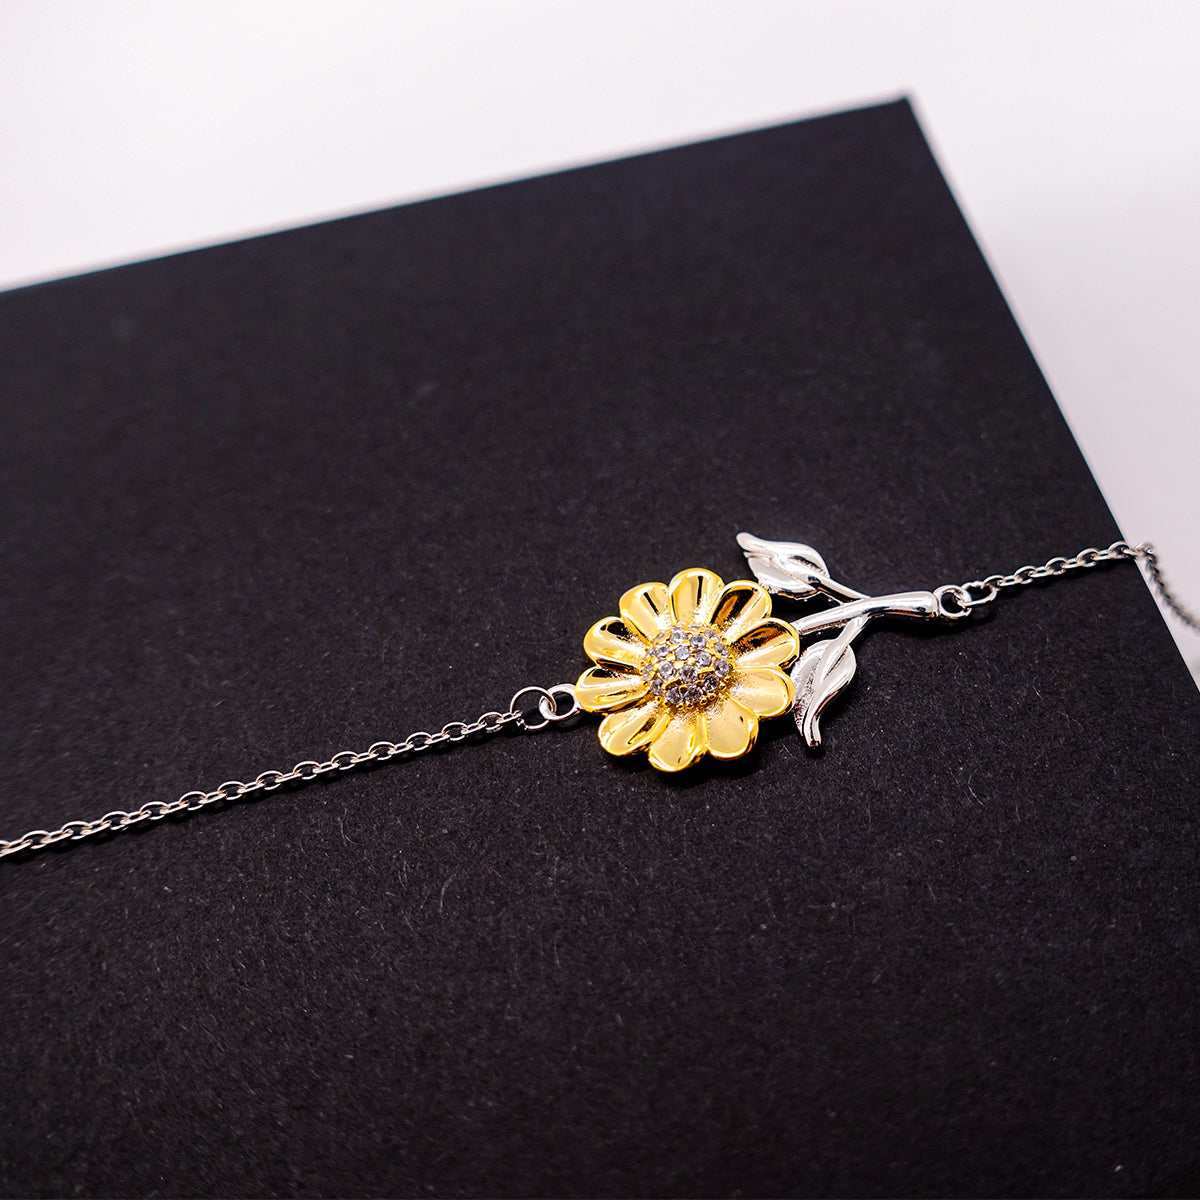 Funny Trainer Mom Gifts, The best kind of MOM raises Trainer, Birthday, Mother's Day, Cute Sunflower Bracelet for Trainer Mom